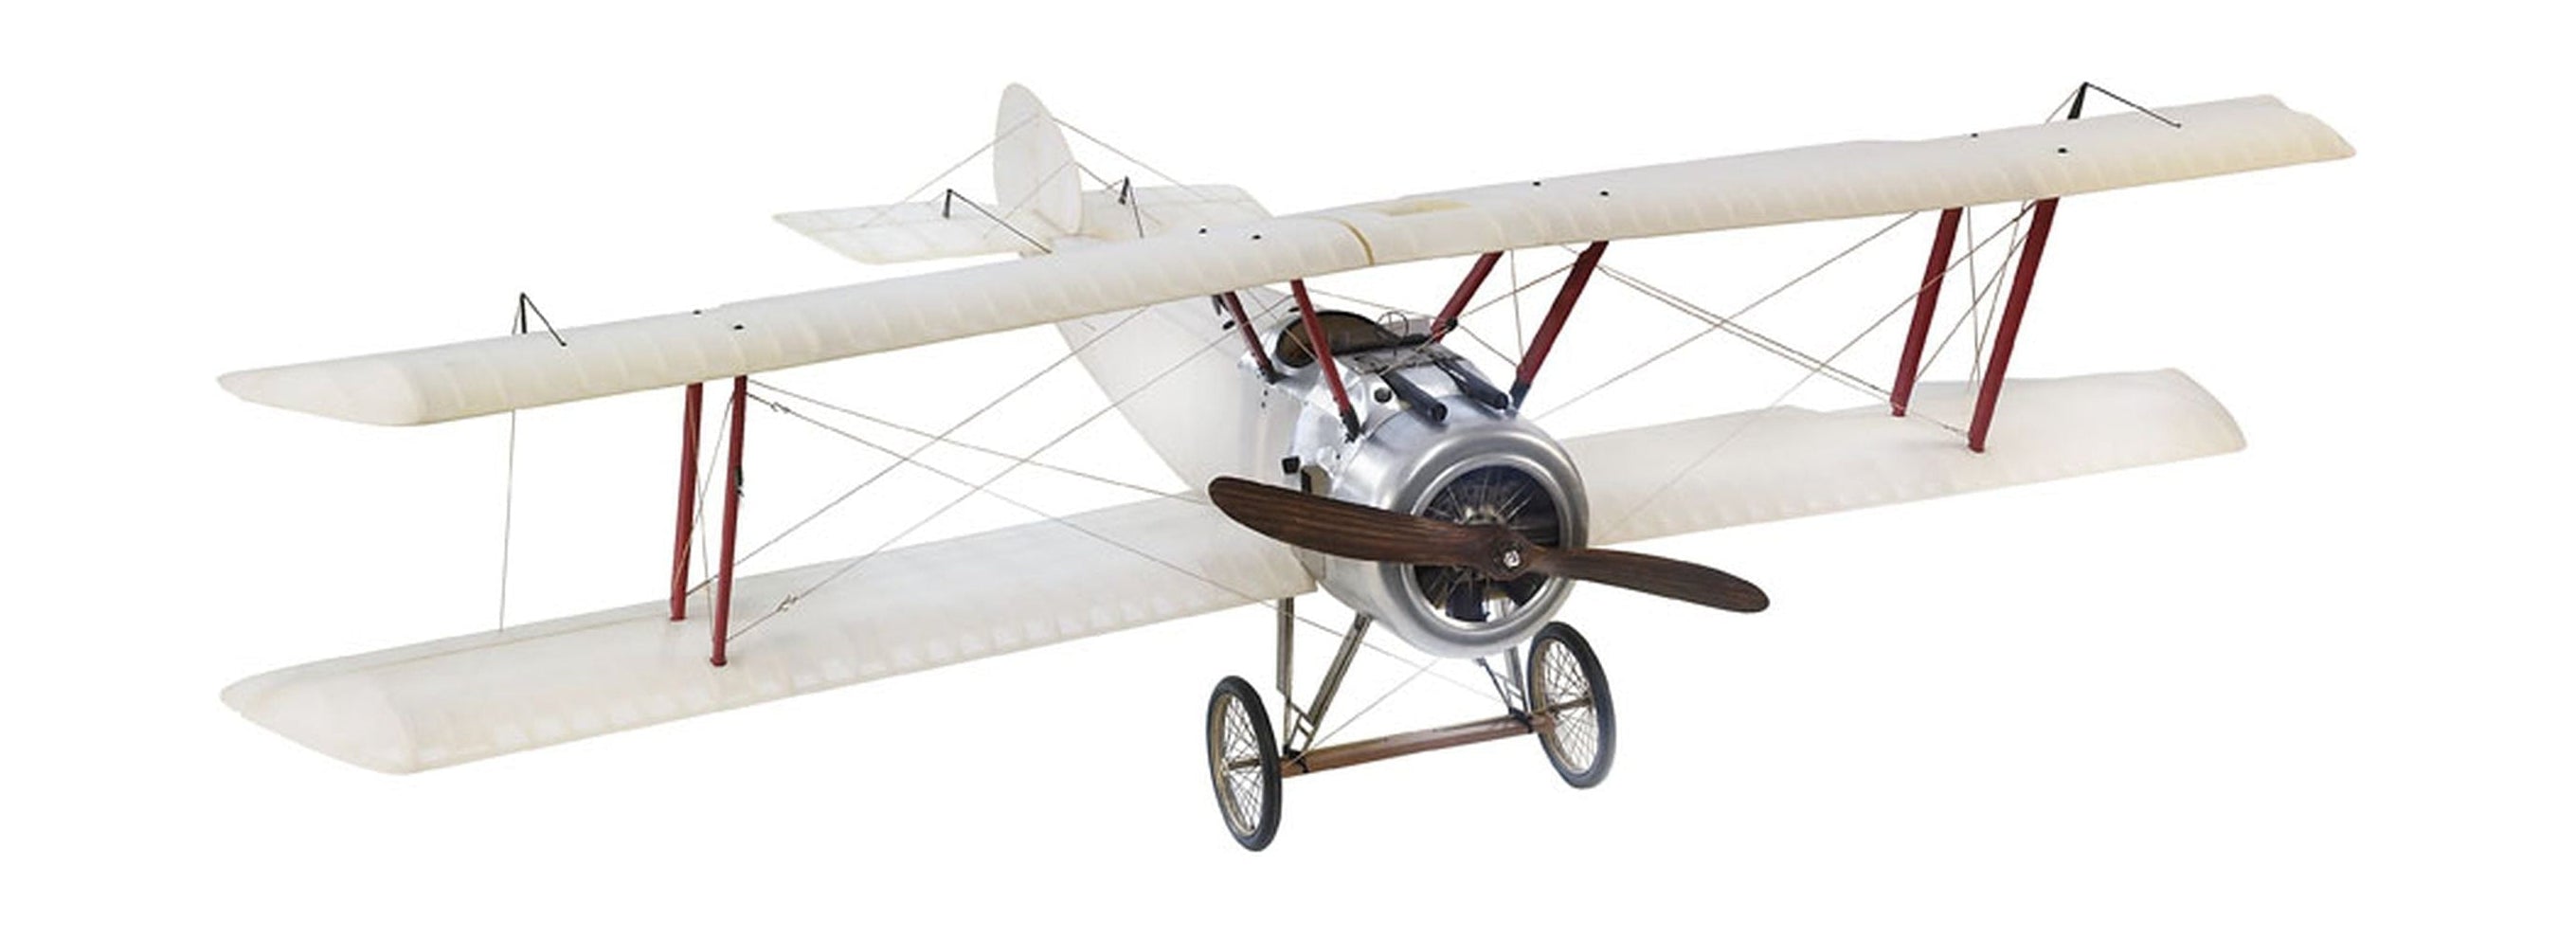 Authentic Models Sopwith Camel Transparent Airplane Model